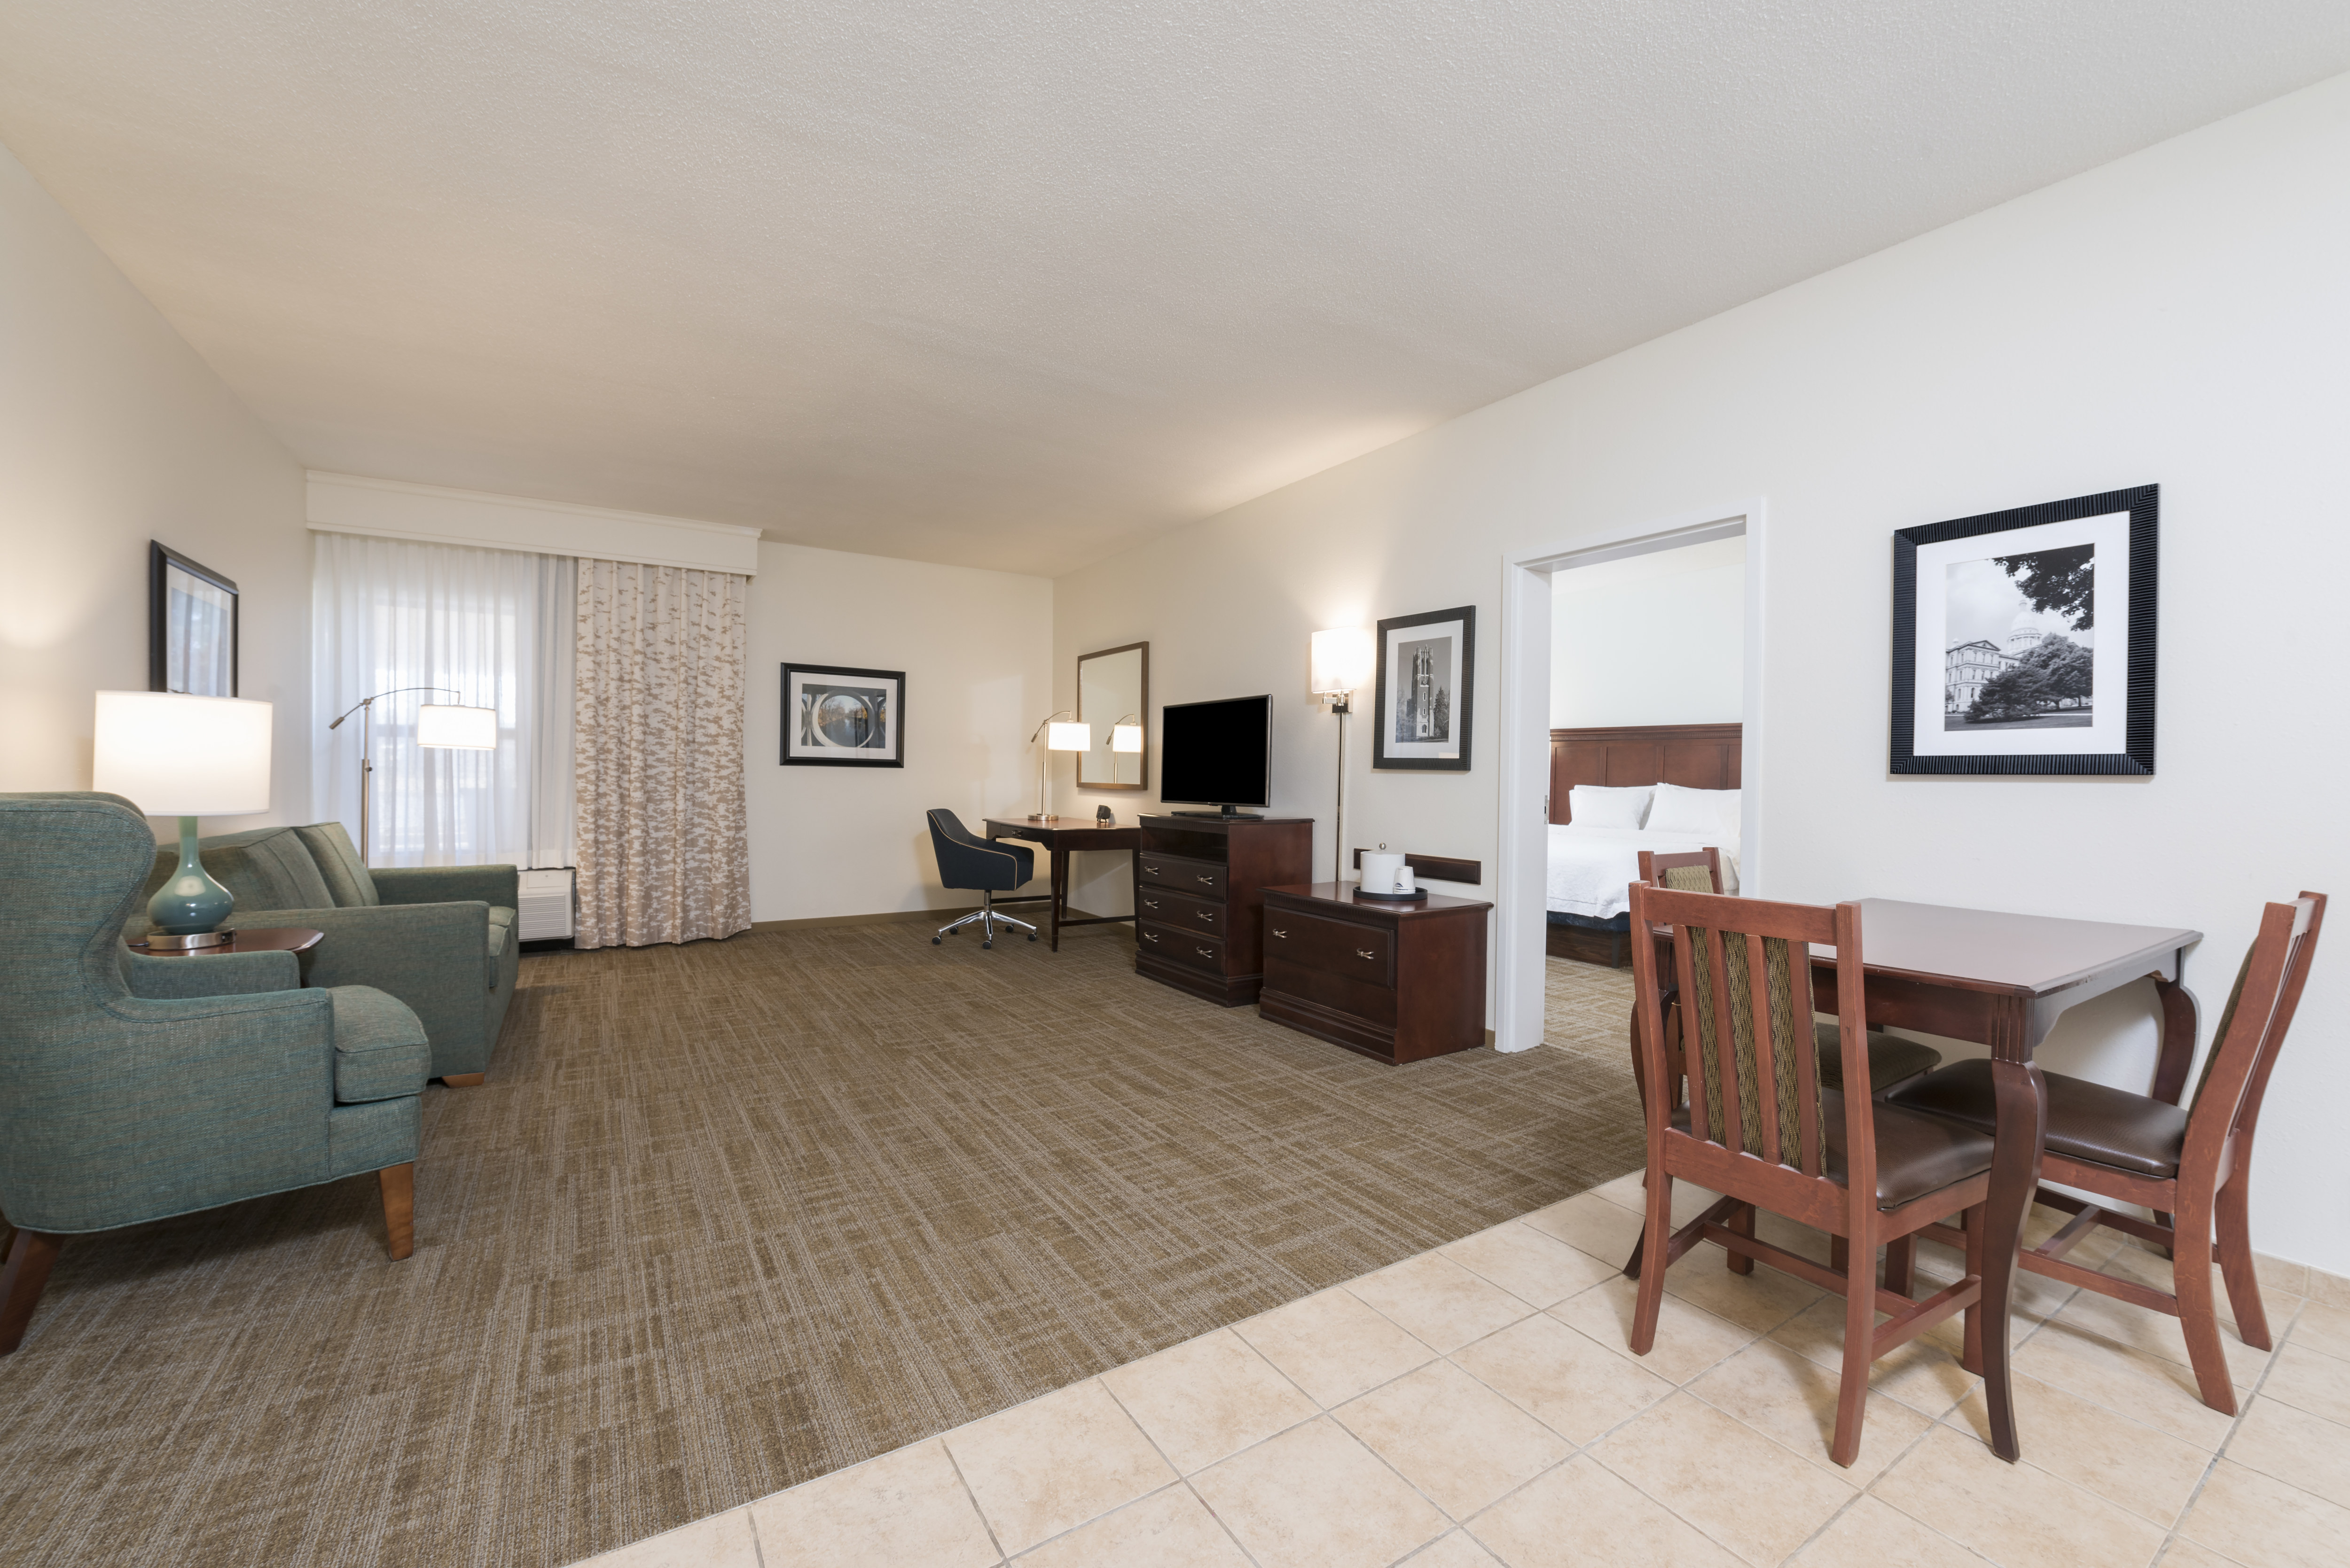 Suite Living Area with Lounge Seating, Table, Chairs, Work Desk, Television and Entry to Bedroom